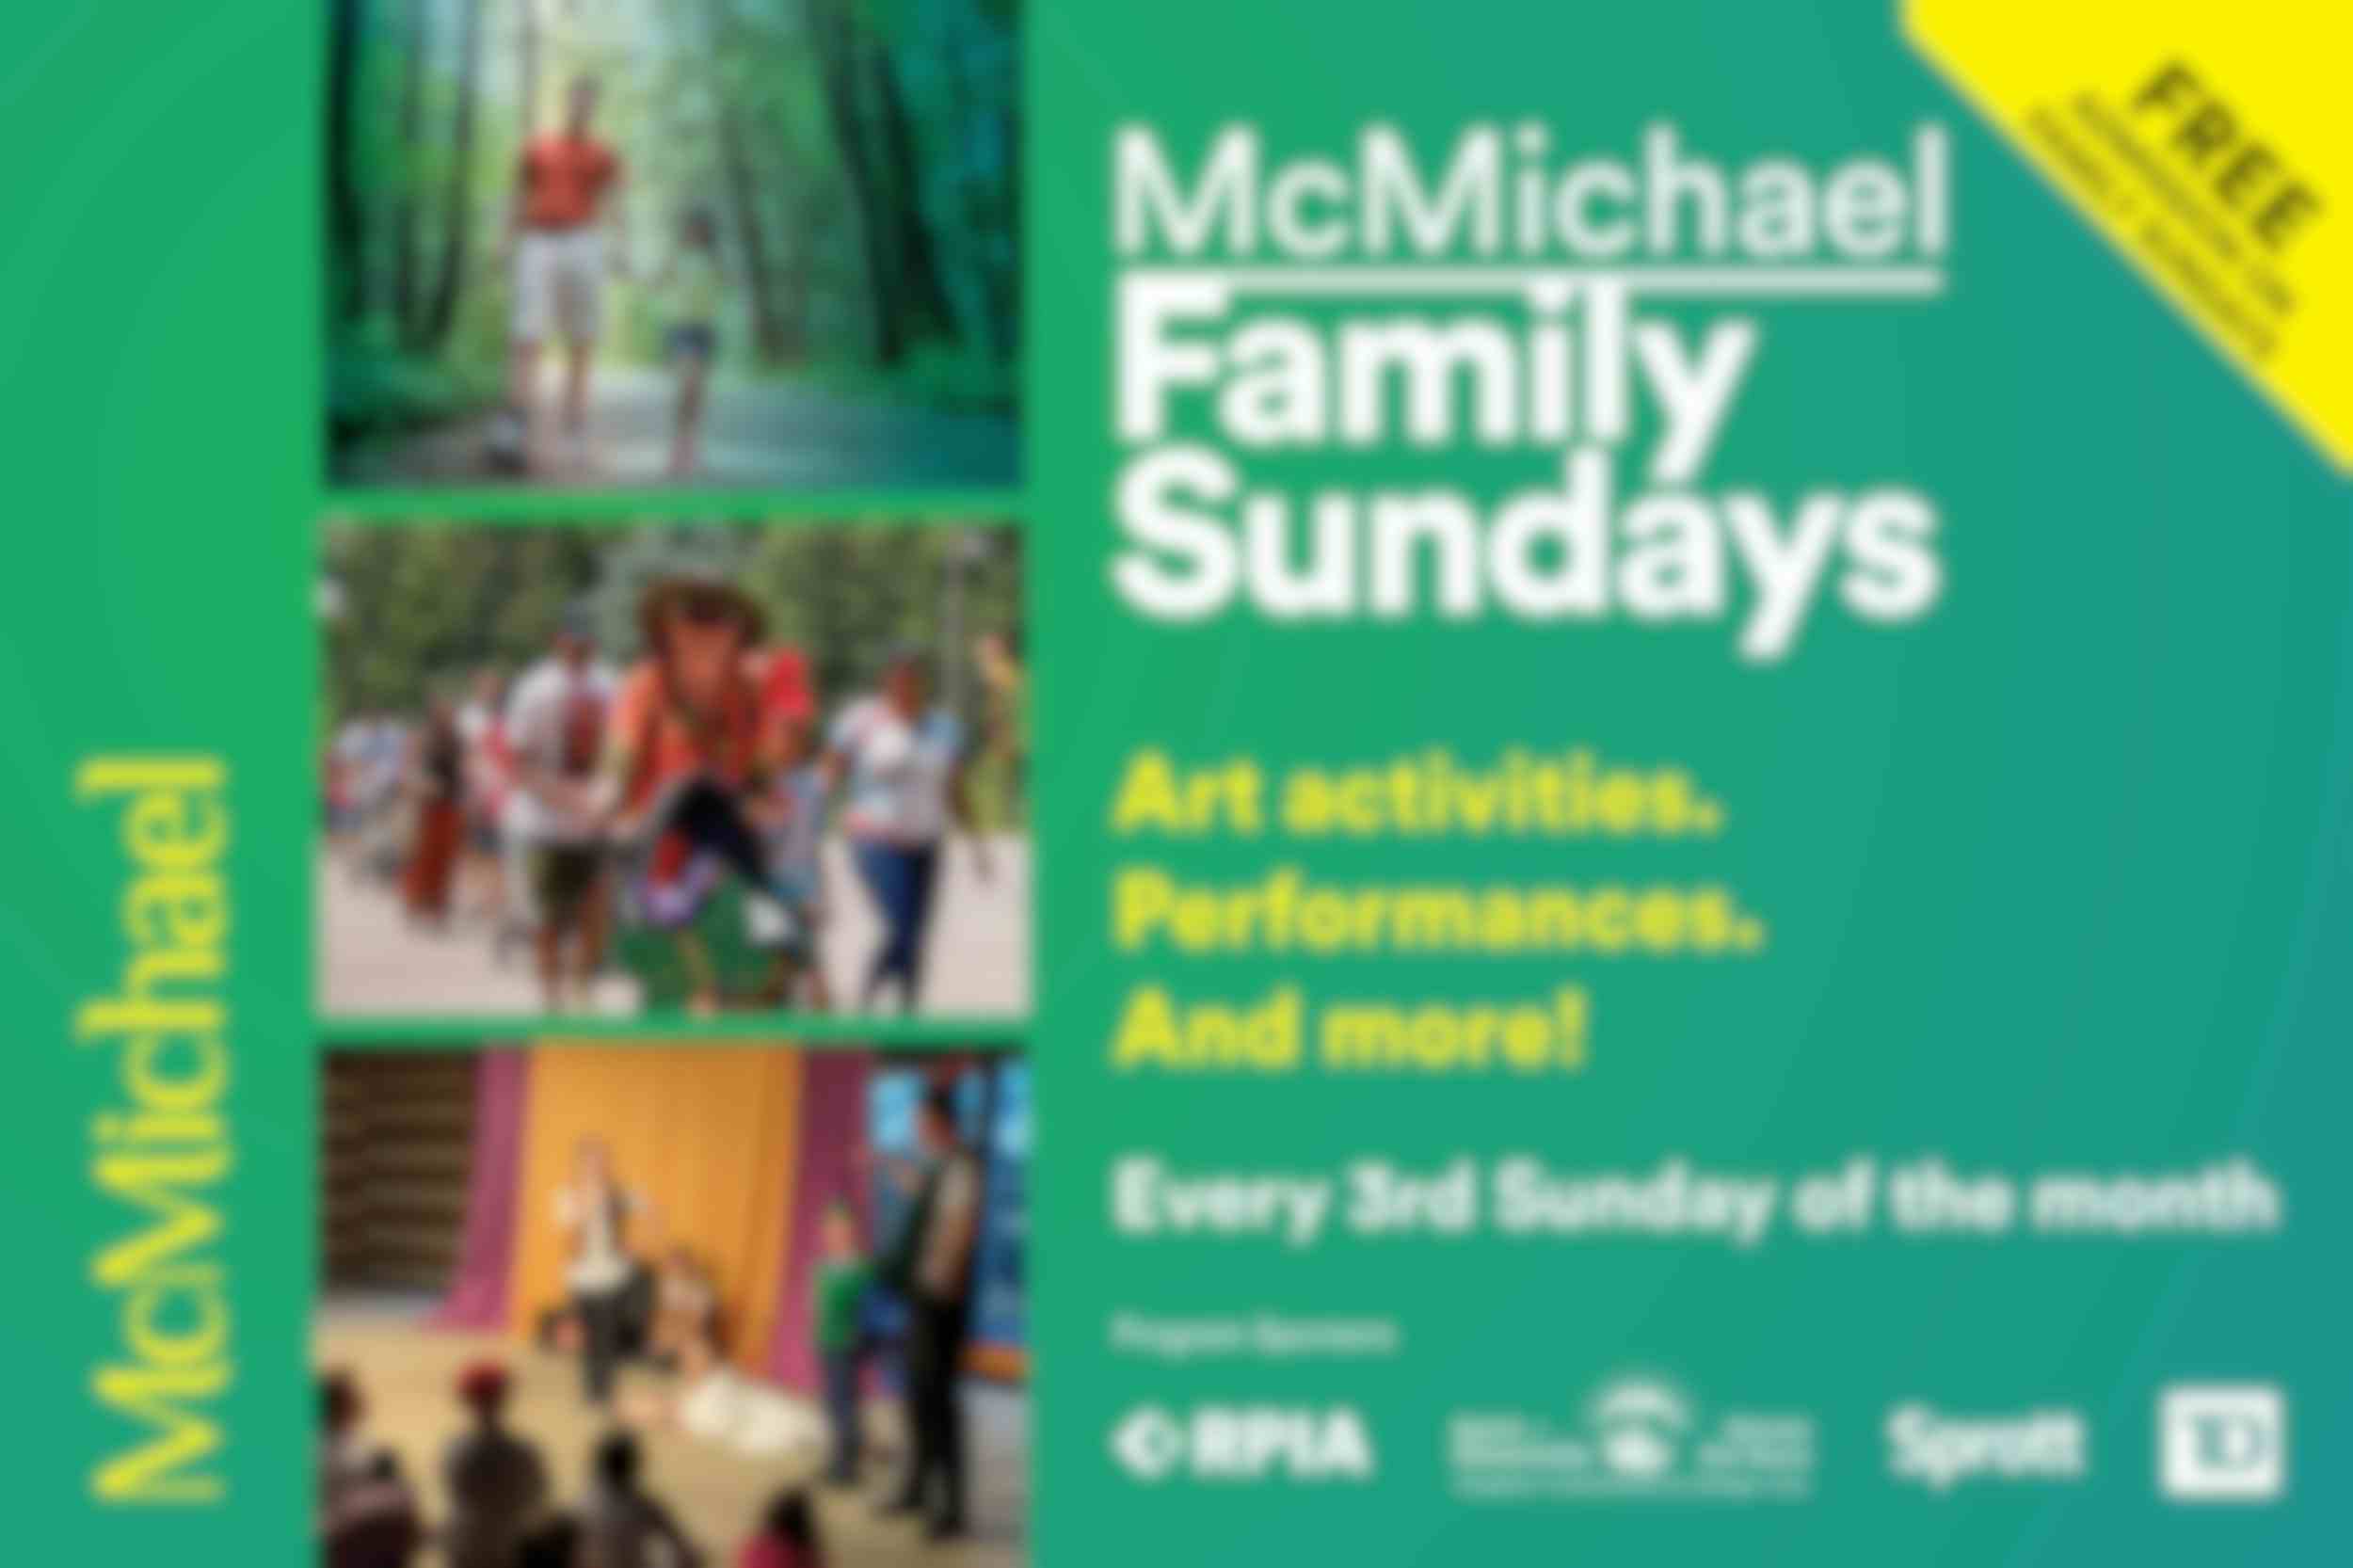 Free Family Sundays at the McMichael